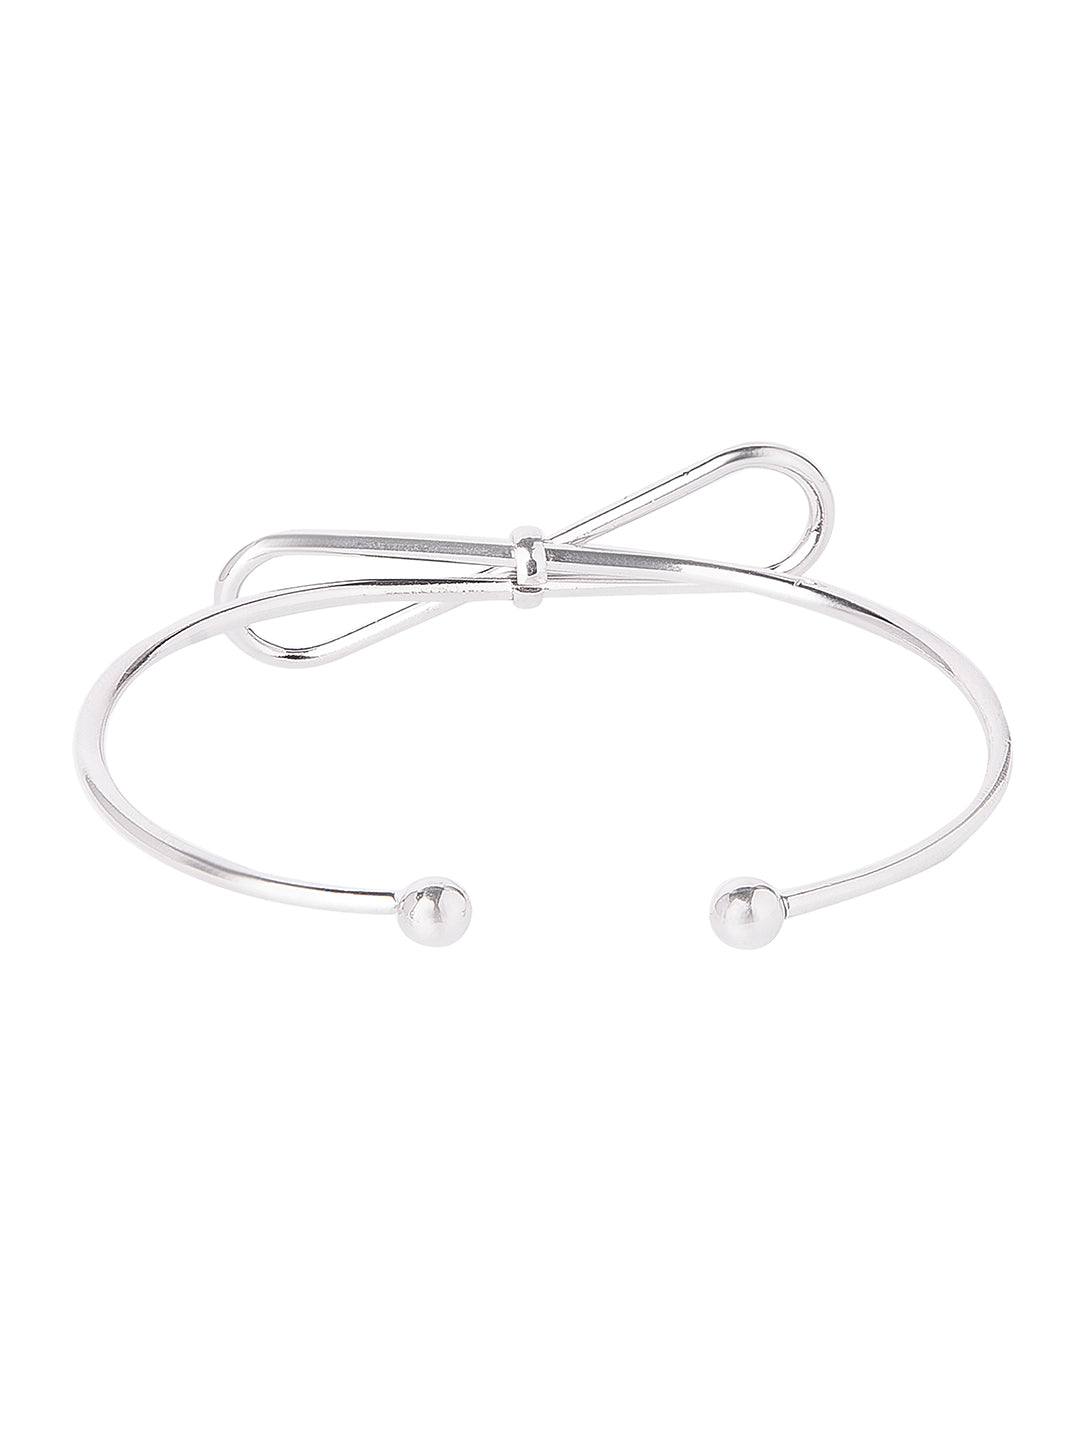 Silver Plated Latest Designer Contemporary Infinity Cuff Bangle Bracelet for Girls & Women (MD_3248_S)